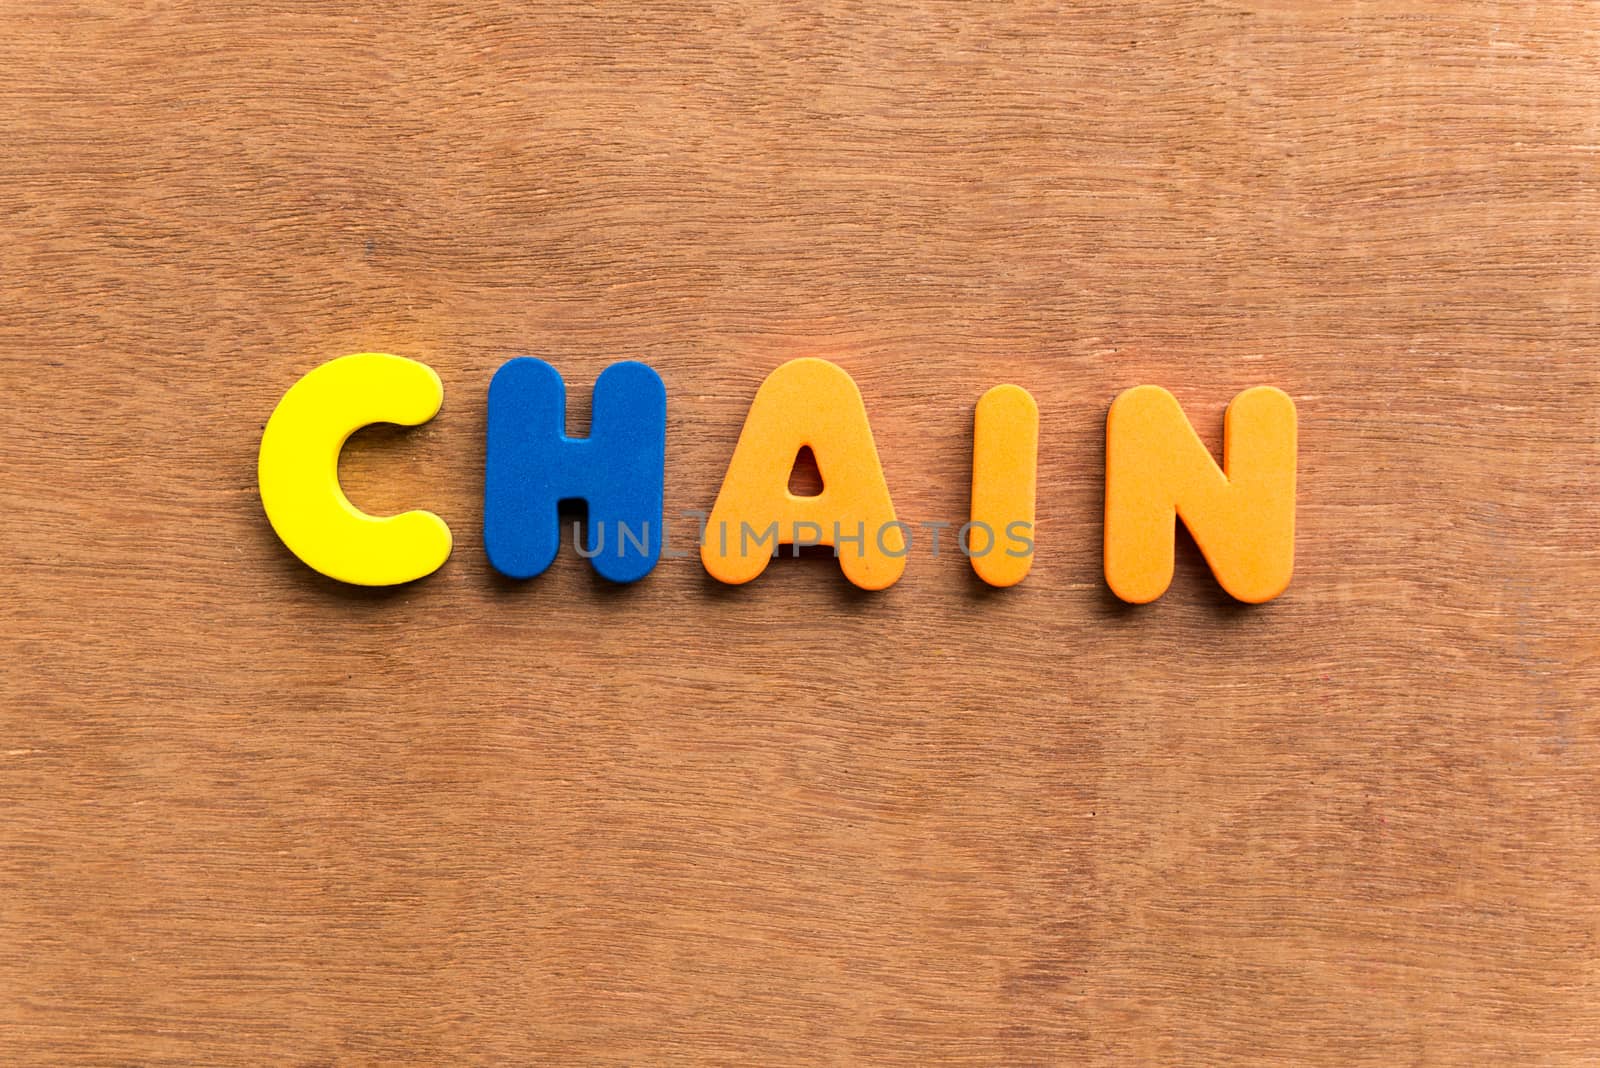 chain colorful word on the wooden background